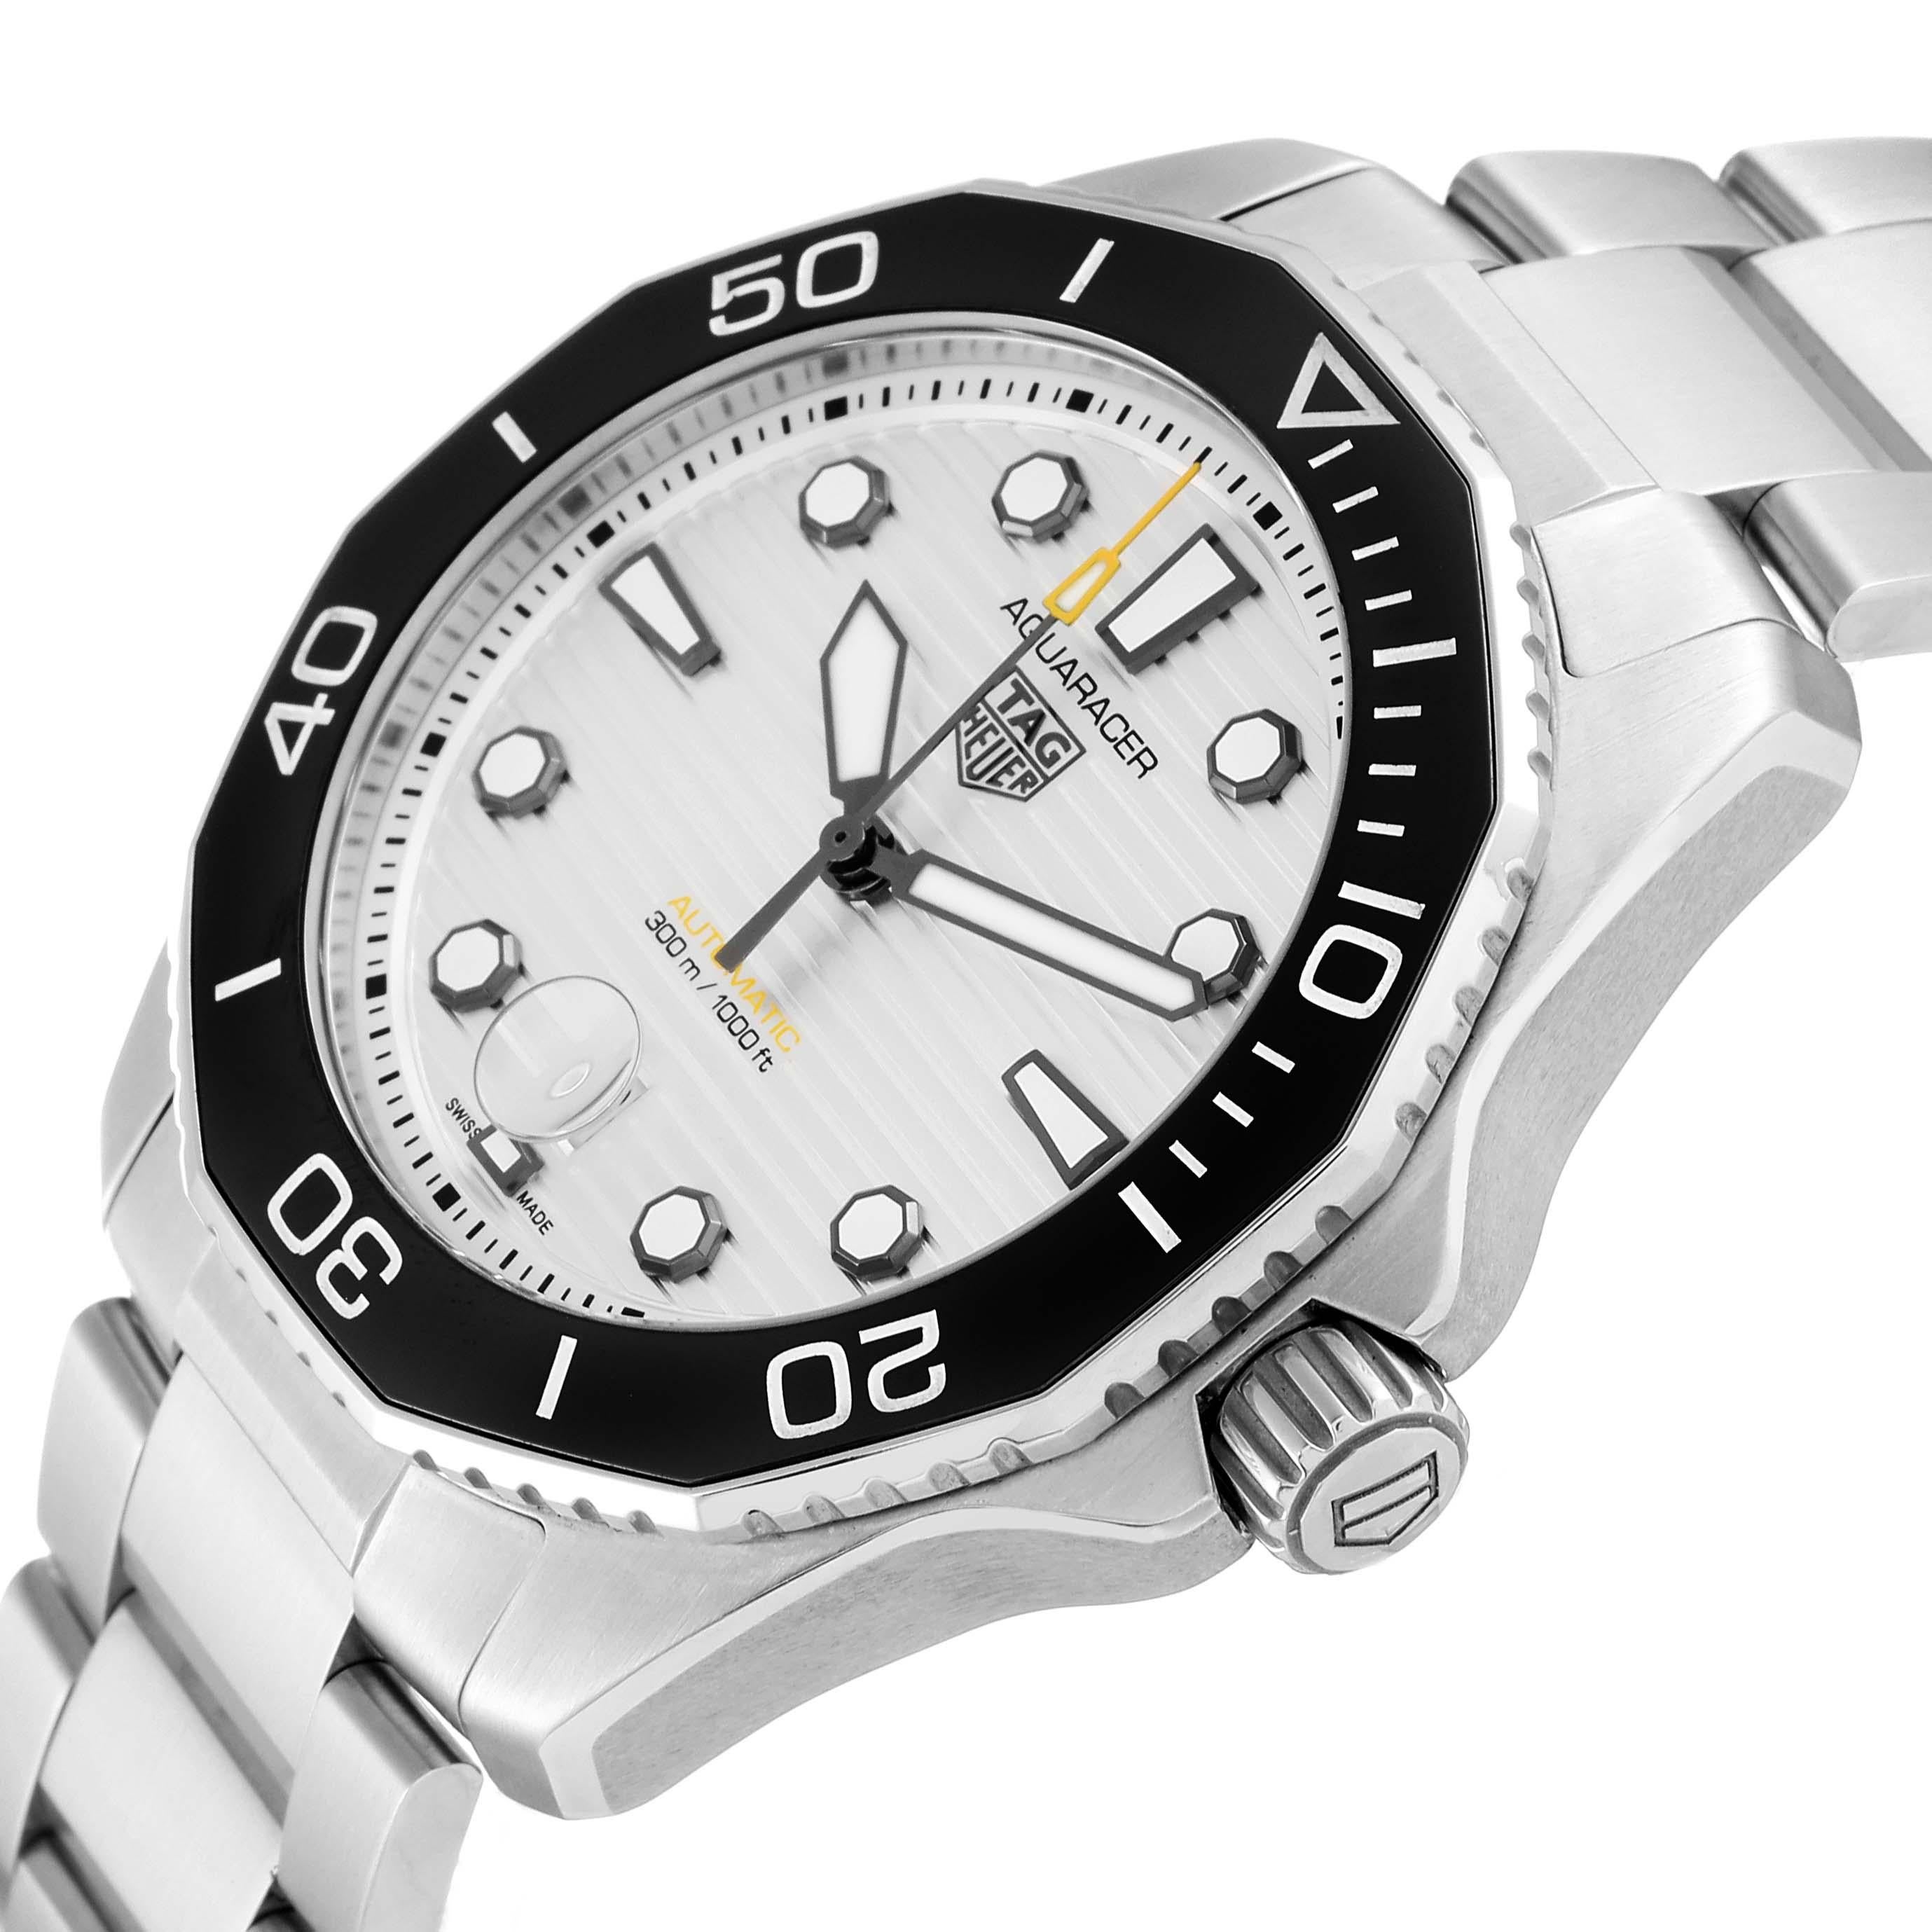 Tag Heuer Aquaracer Professional Silver Dial Steel Mens Watch WBP201C Unworn. Automatic self-winding movement. Stainless steel case 43.0 mm in diameter. Stainless steel unidirectional rotating bezel. Scratch resistant sapphire crystal. Silver dial